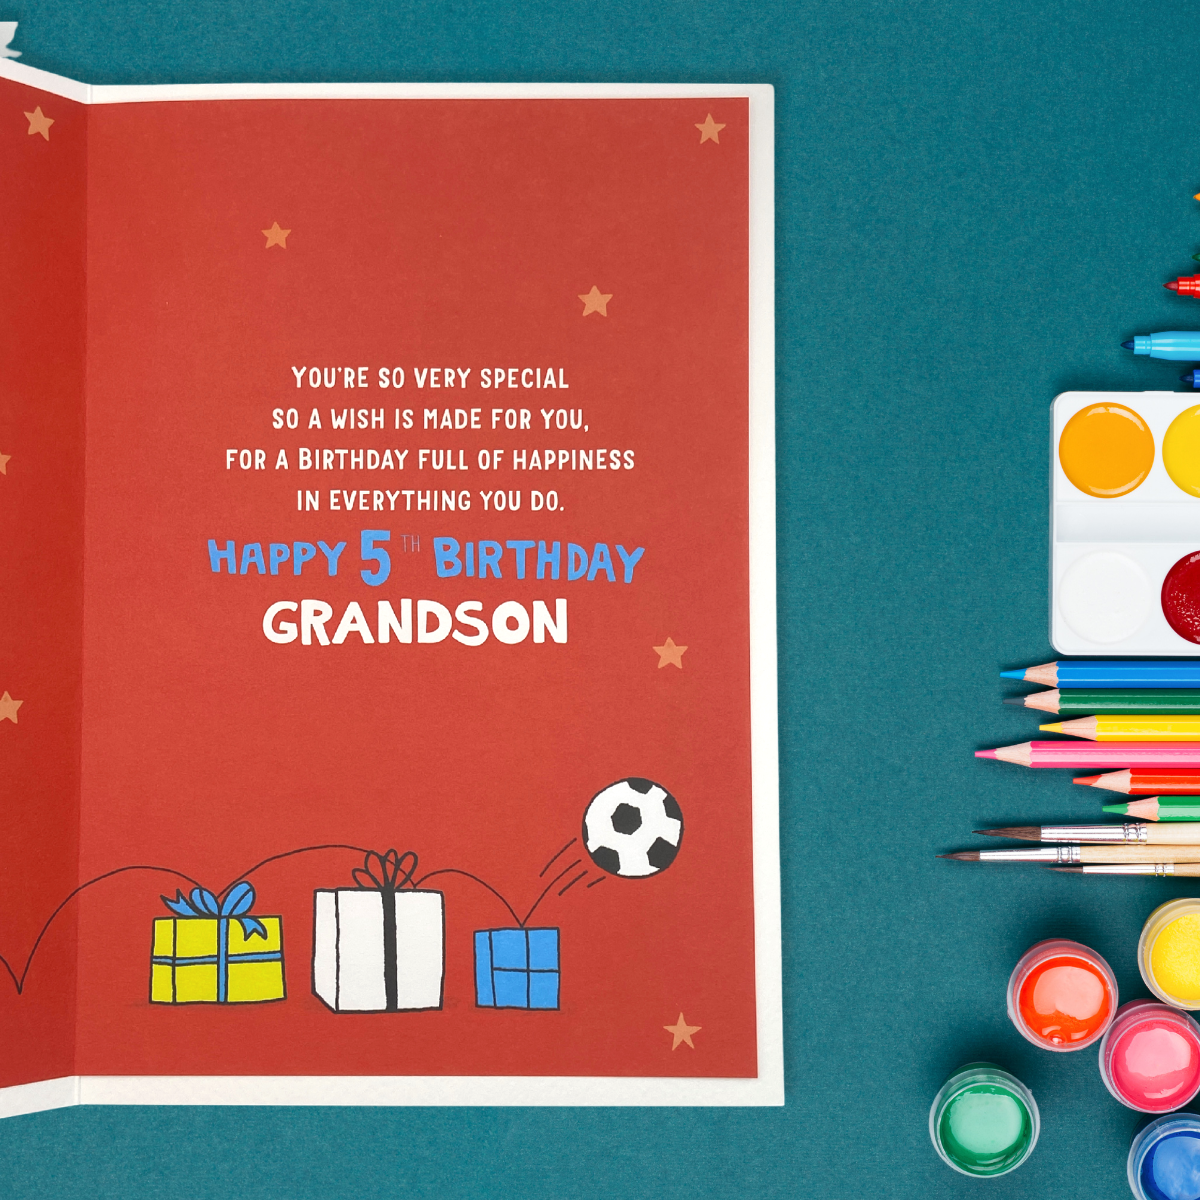 inside image with red printed insert with football bouncing on gifts and printed verse